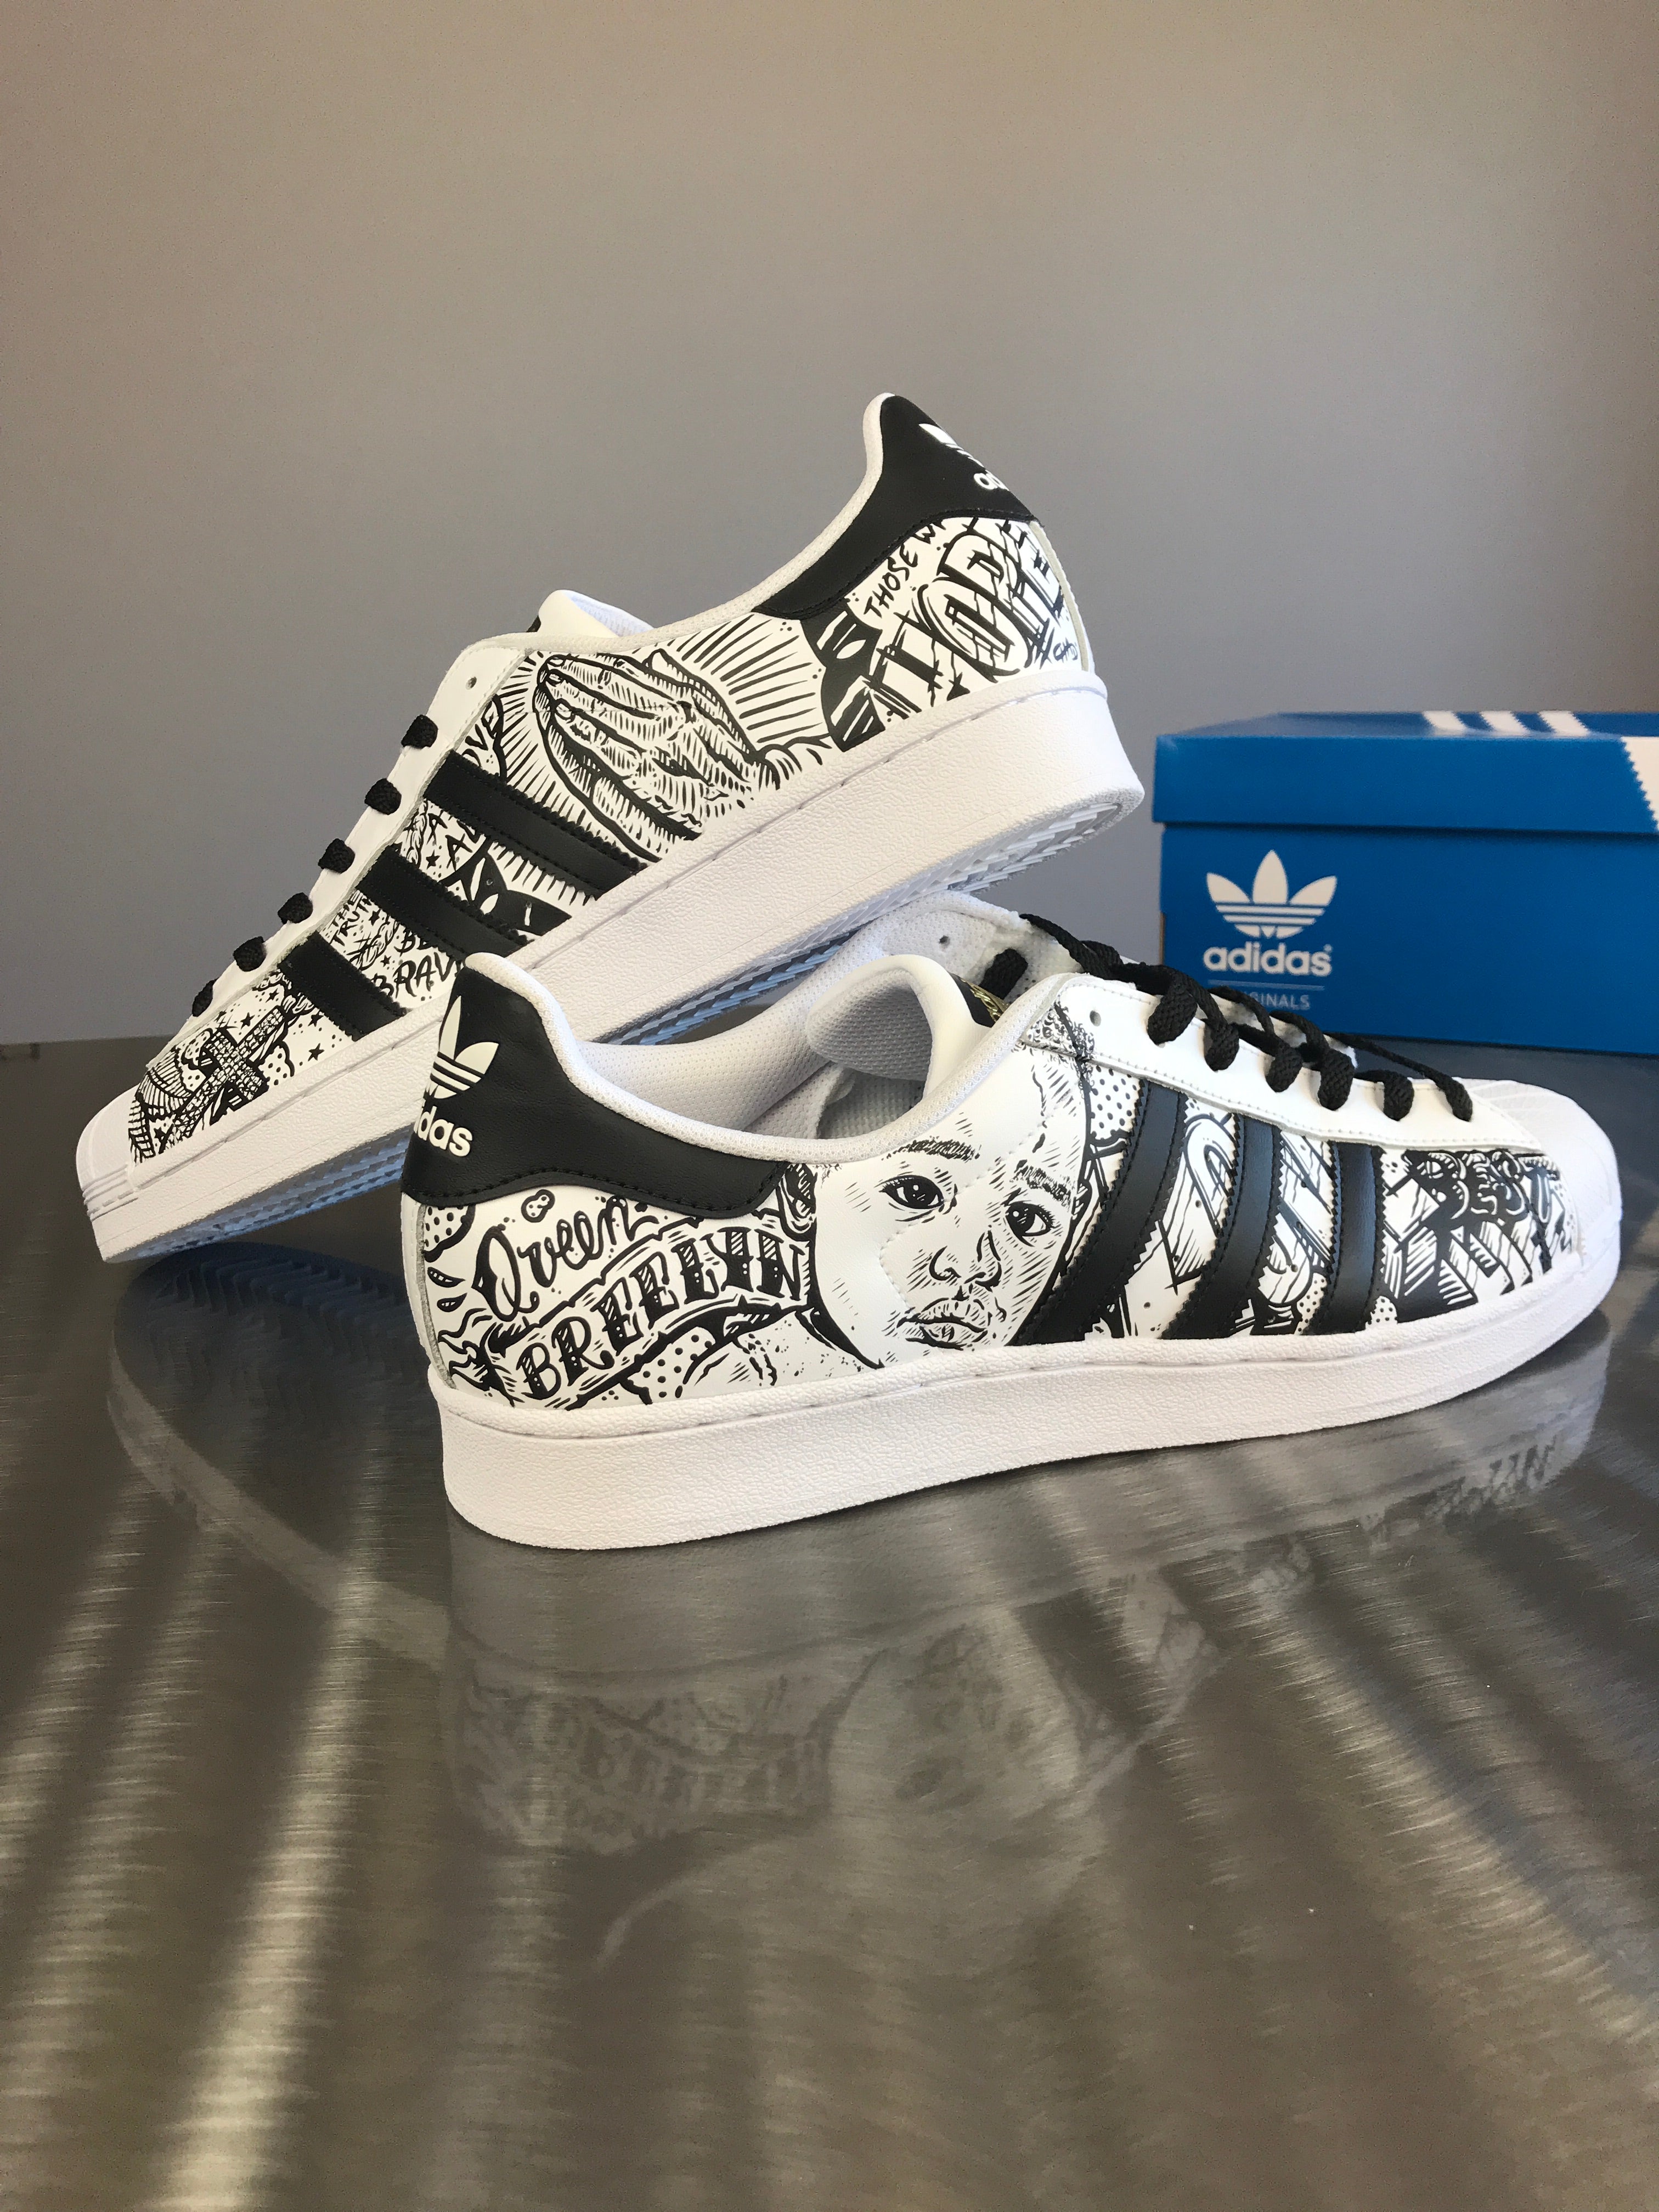 Jalen Ramsey Adidas Superstar shoes – chadcantcolor